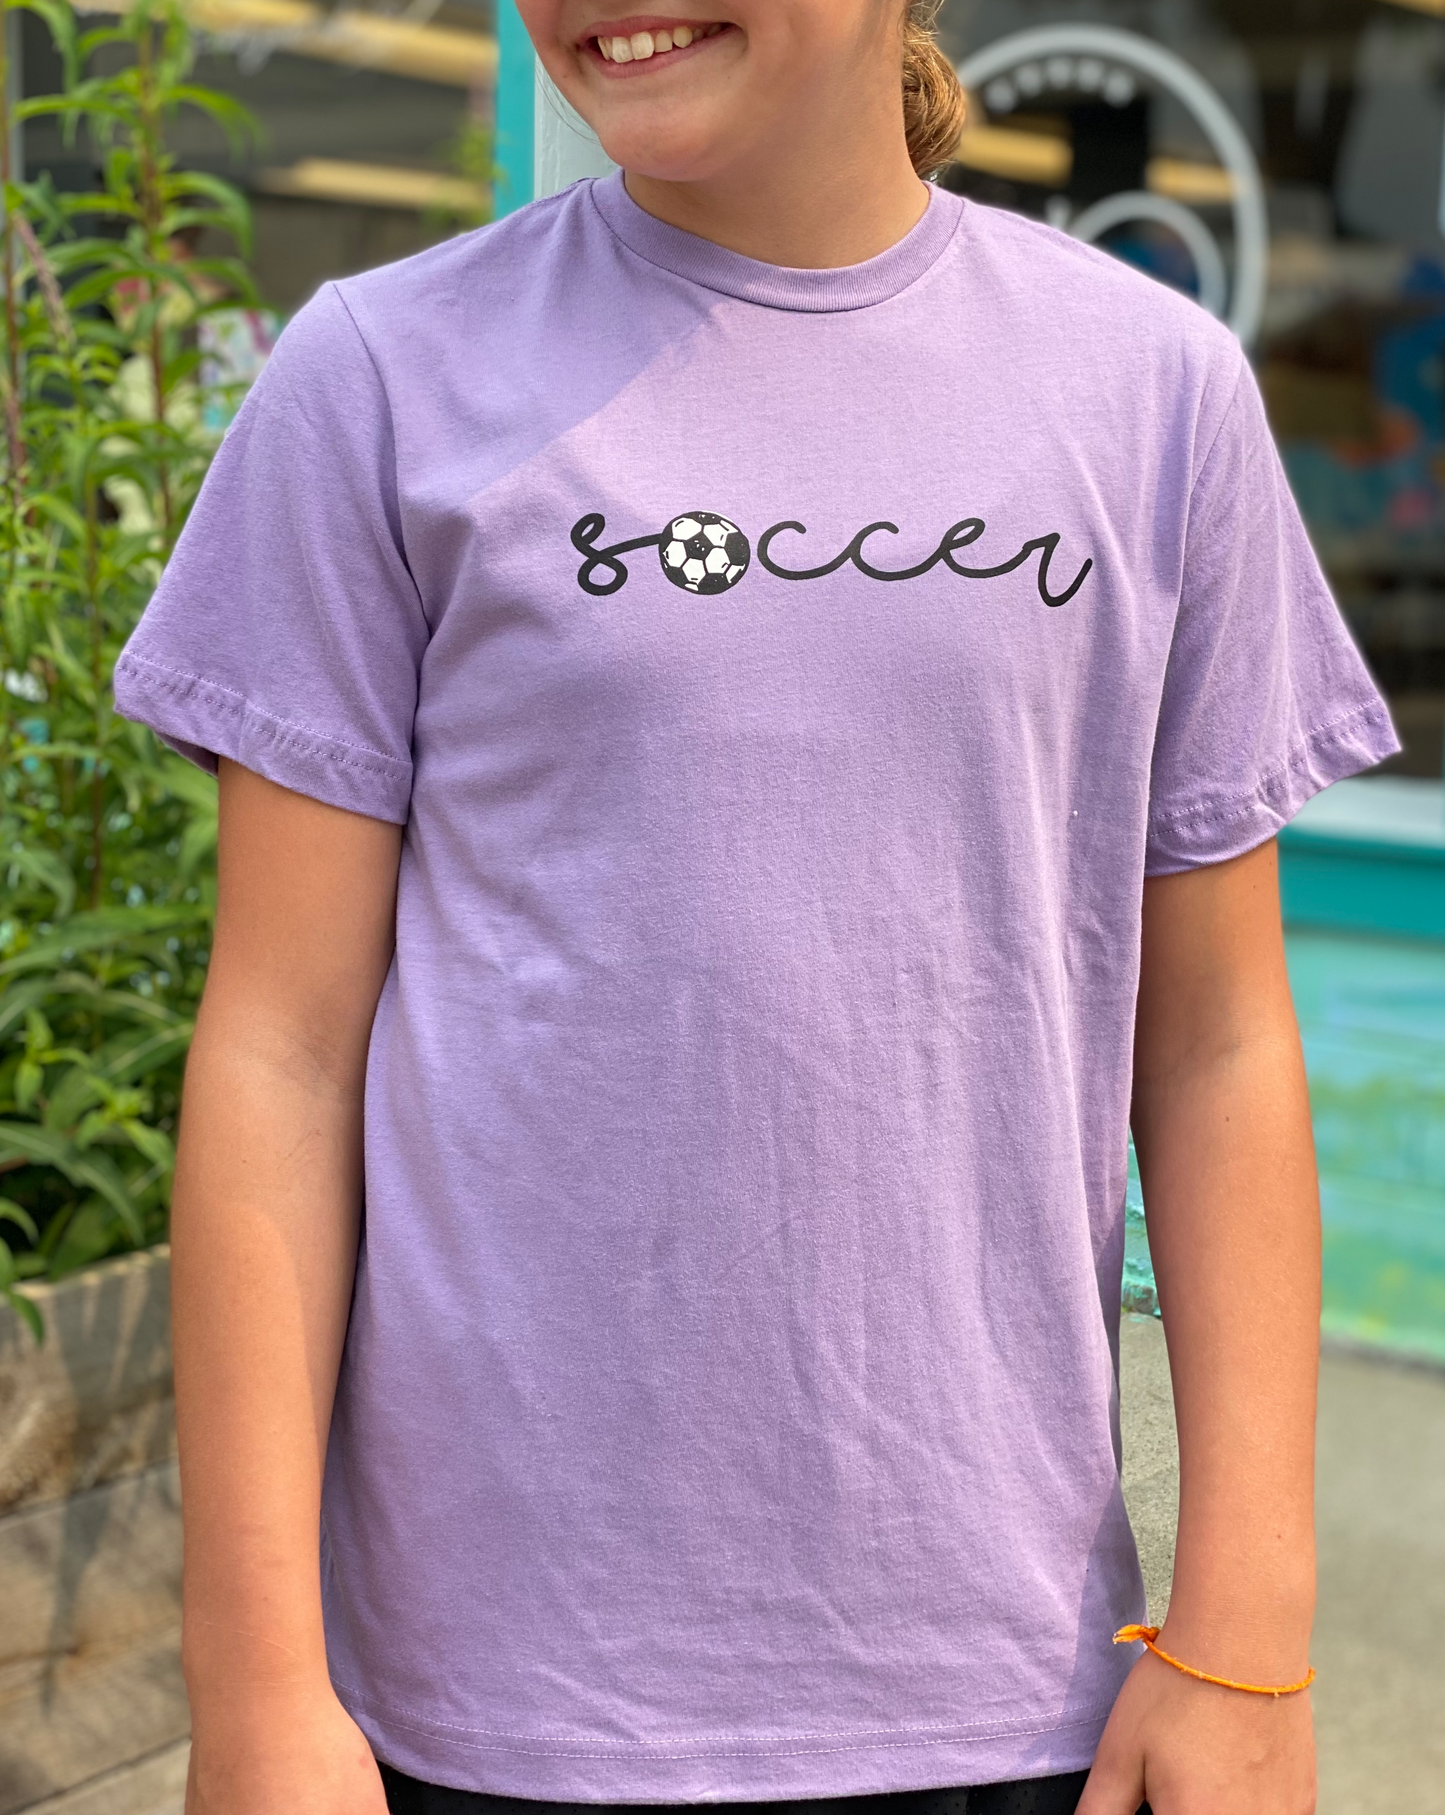 Soccer Tee - More Colors